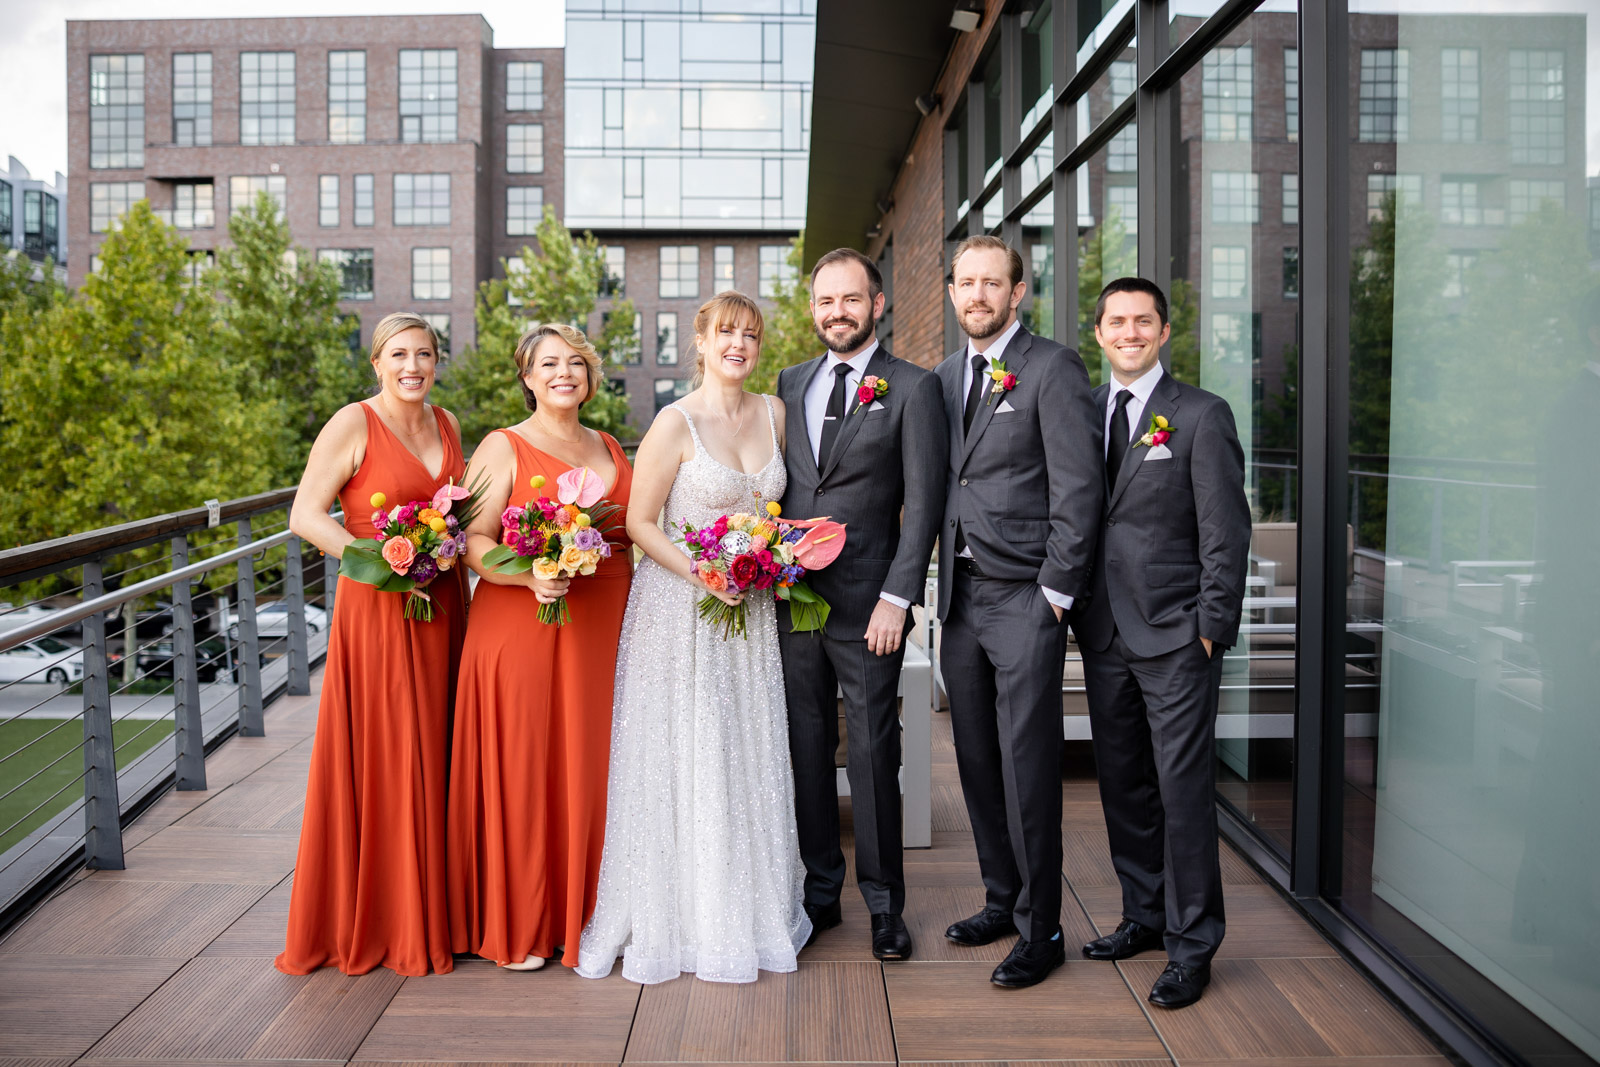 Bridal party portrait at District Winery Wedding